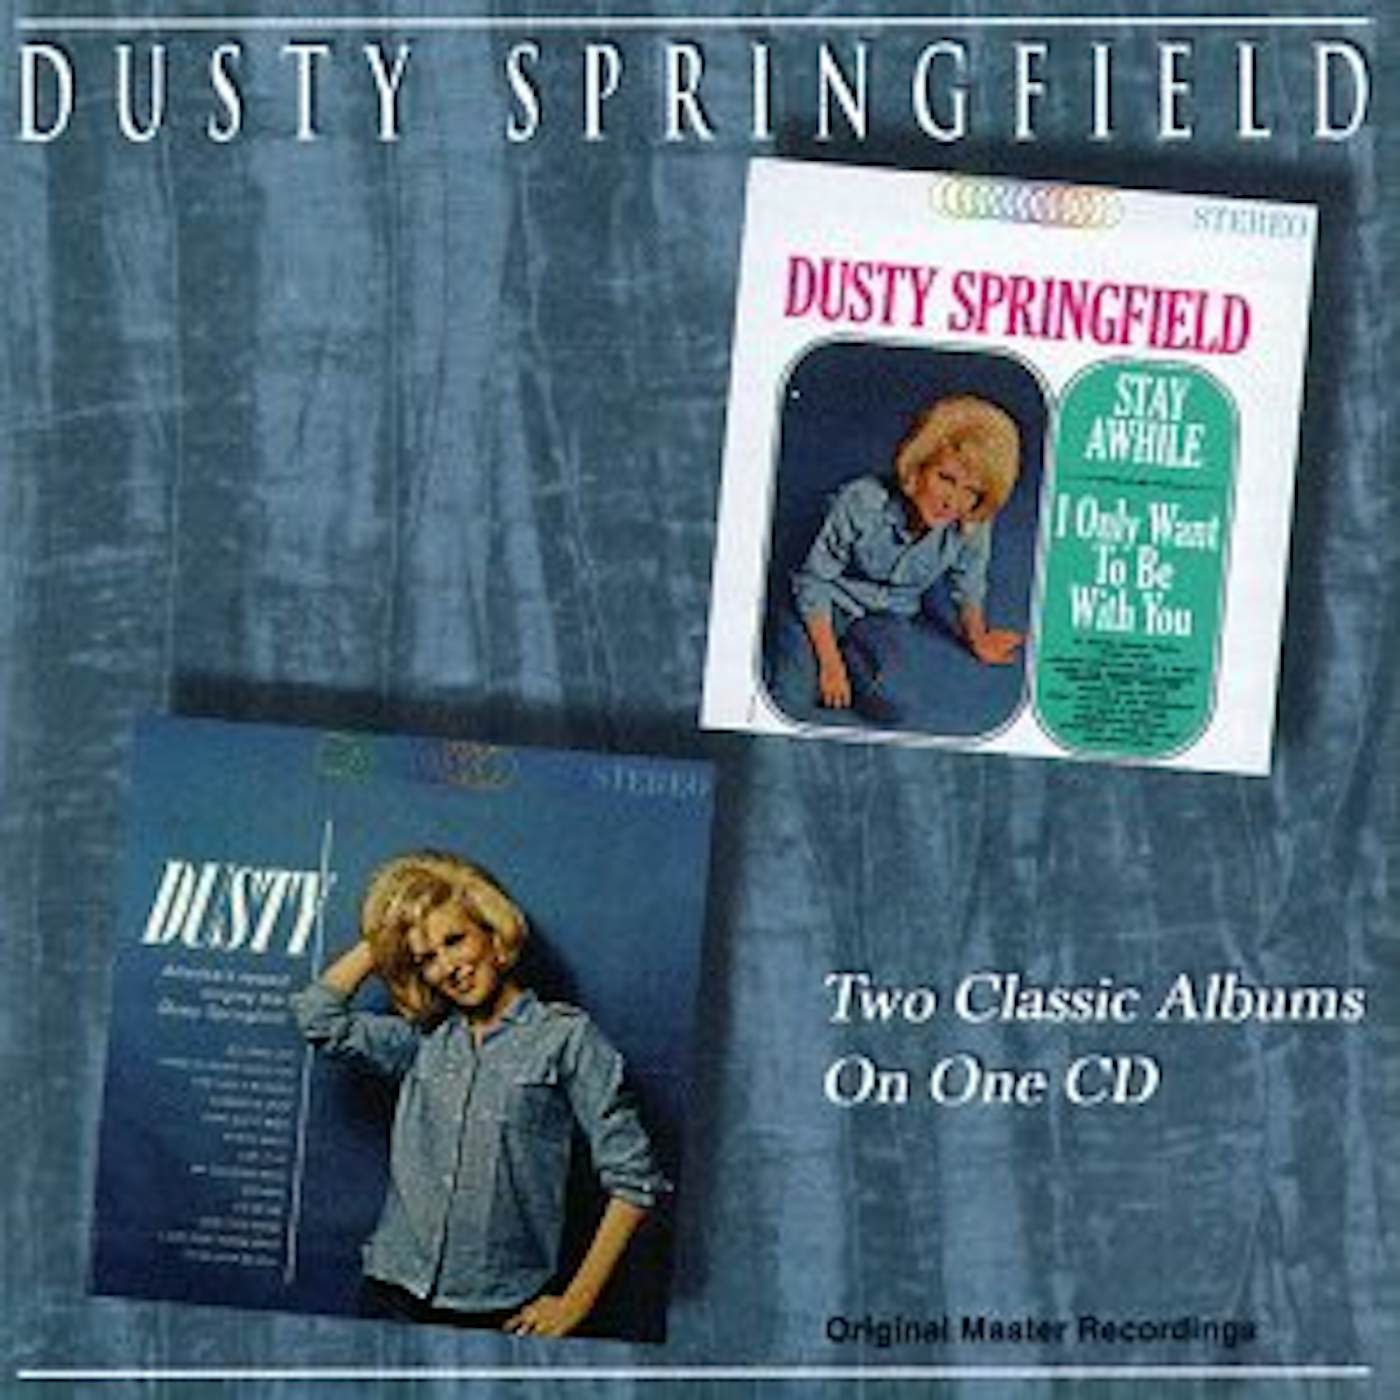 Dusty Springfield STAY AWHILE - I ONLY WANT TO BE WITH YOU (180G MONO) Vinyl Record